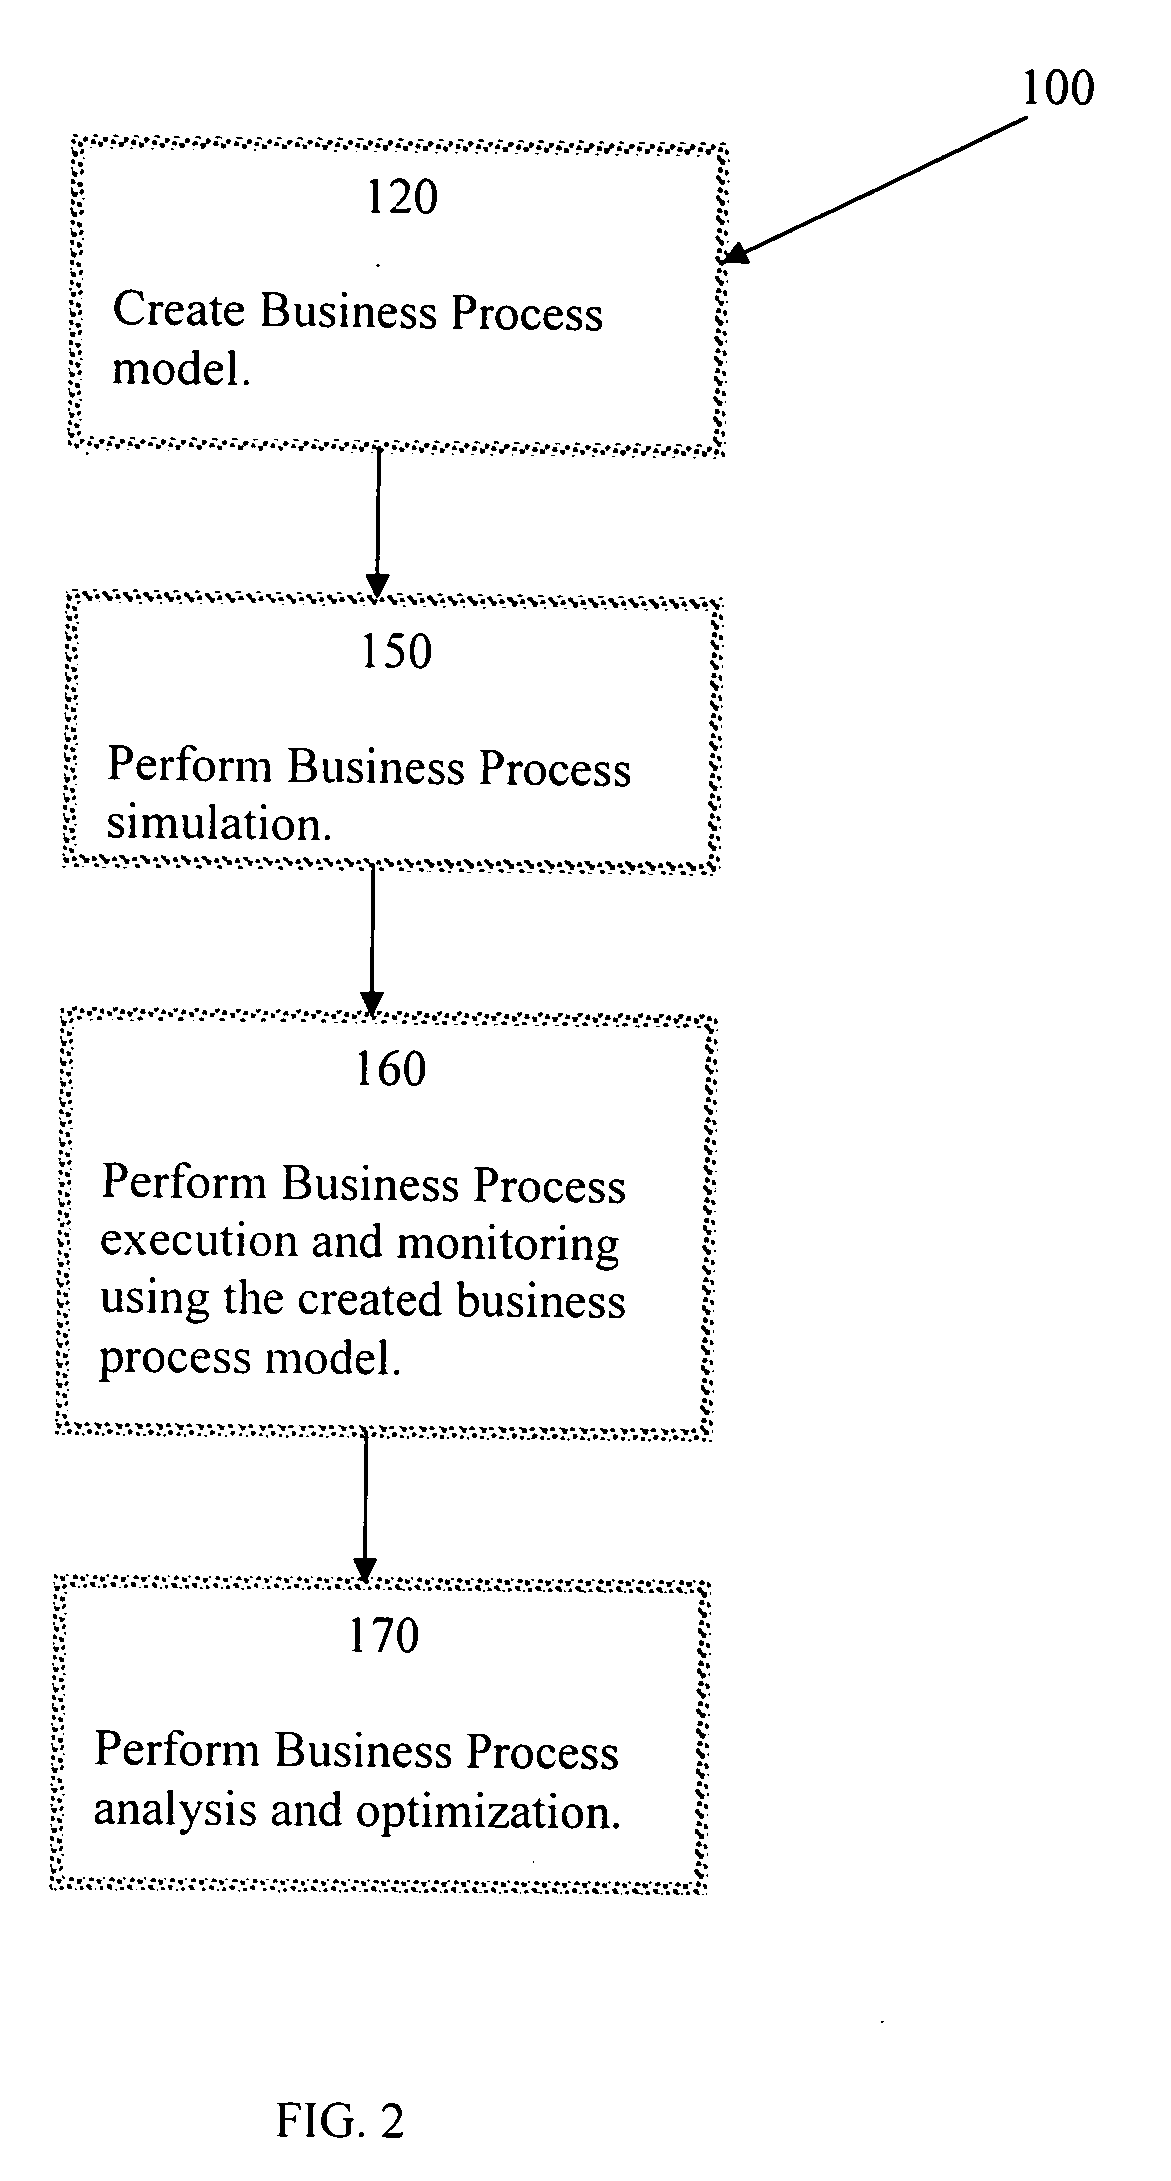 Systems and methods for business process automation, analysis, and optimization